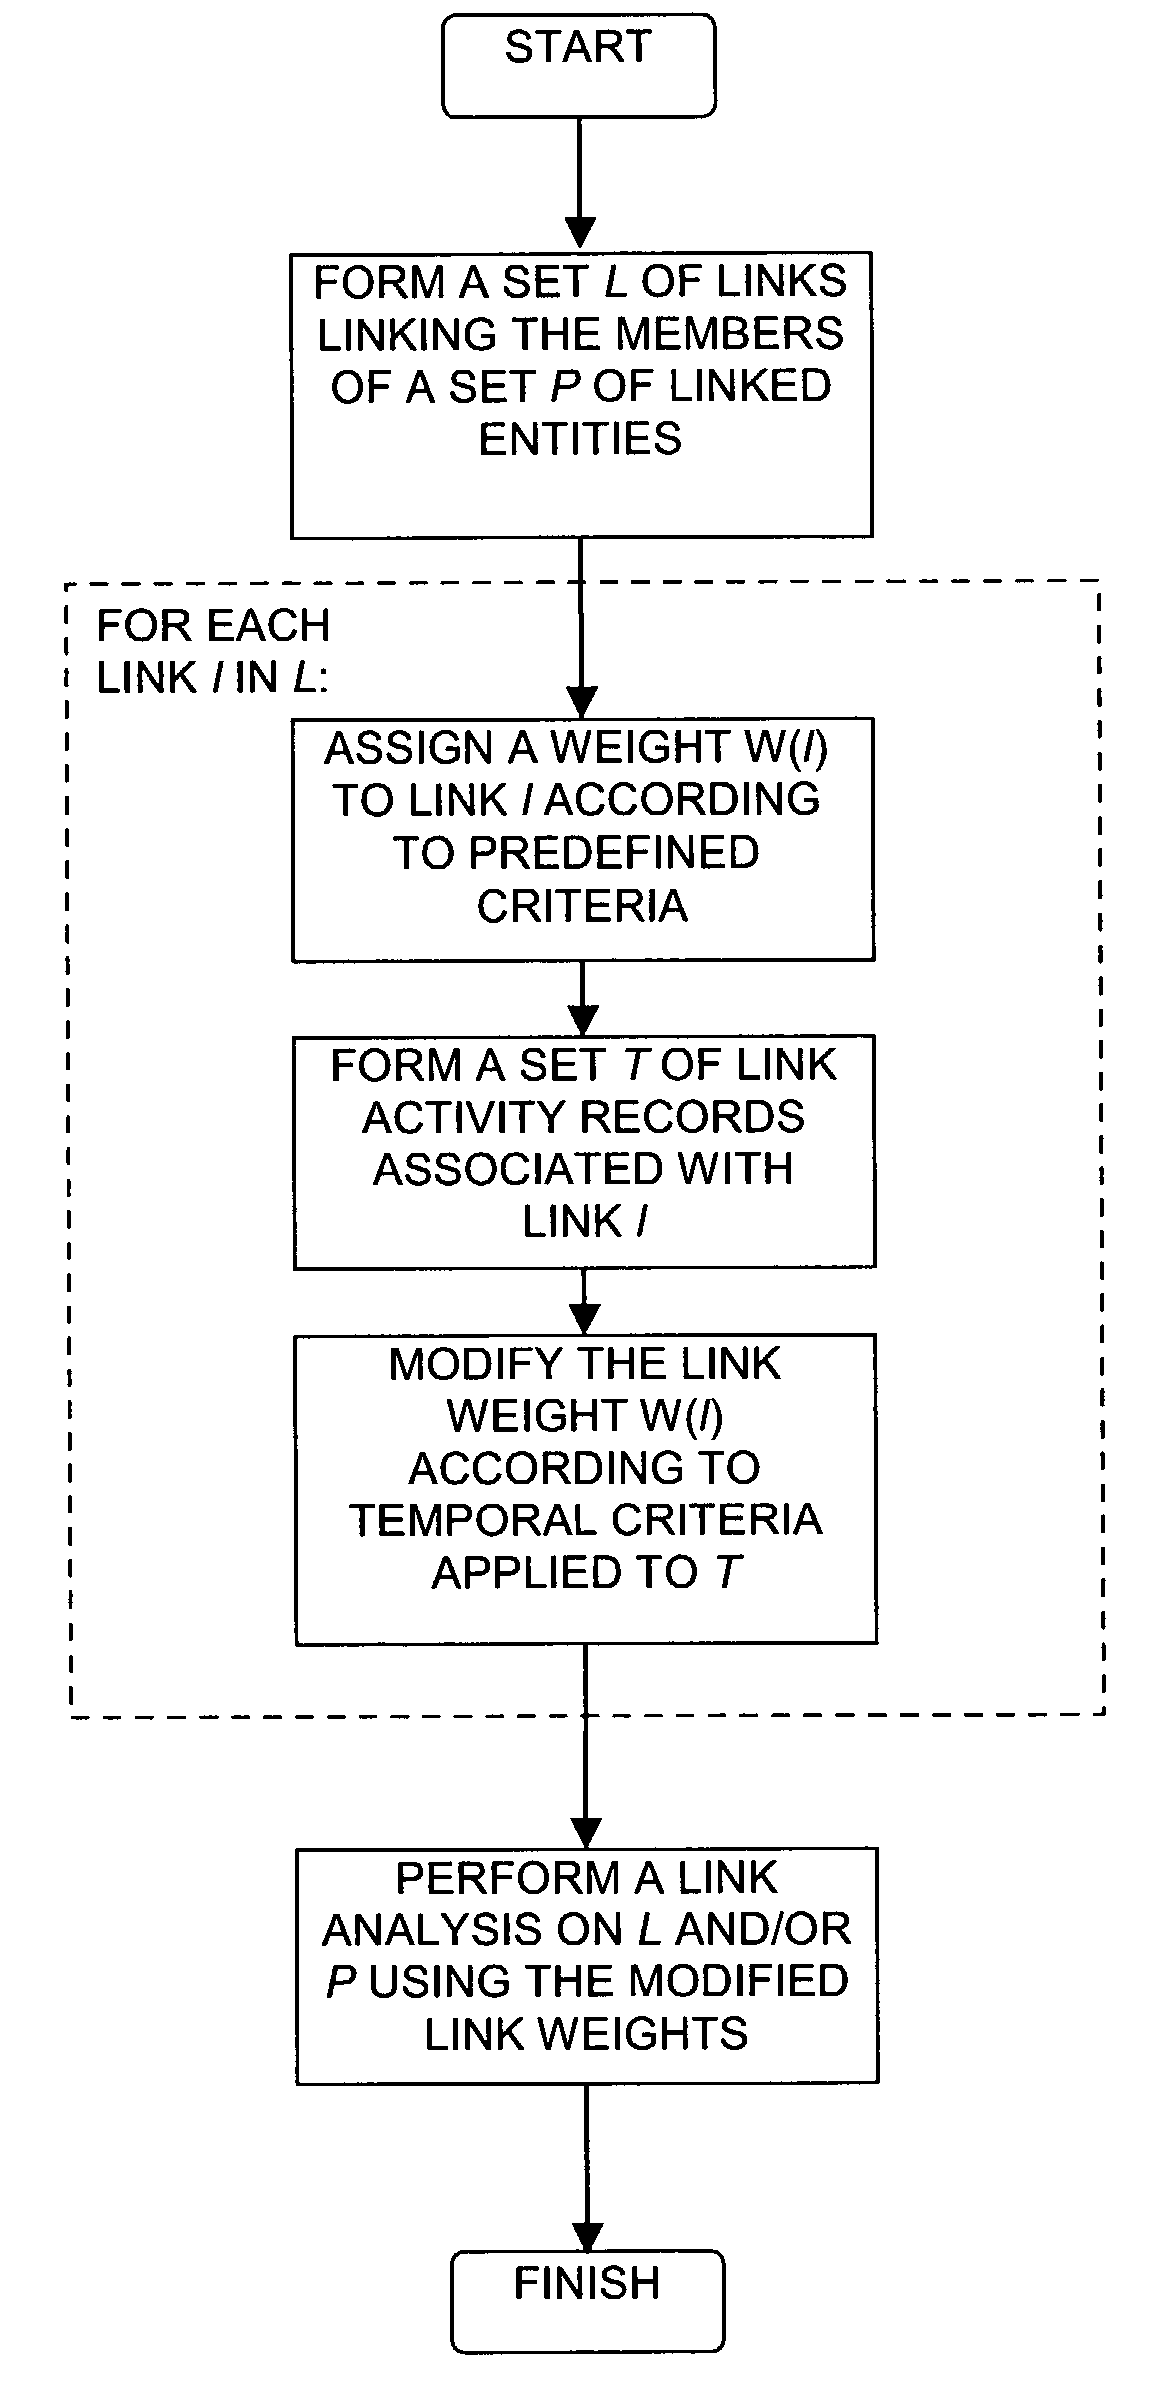 Temporal link analysis of linked entities